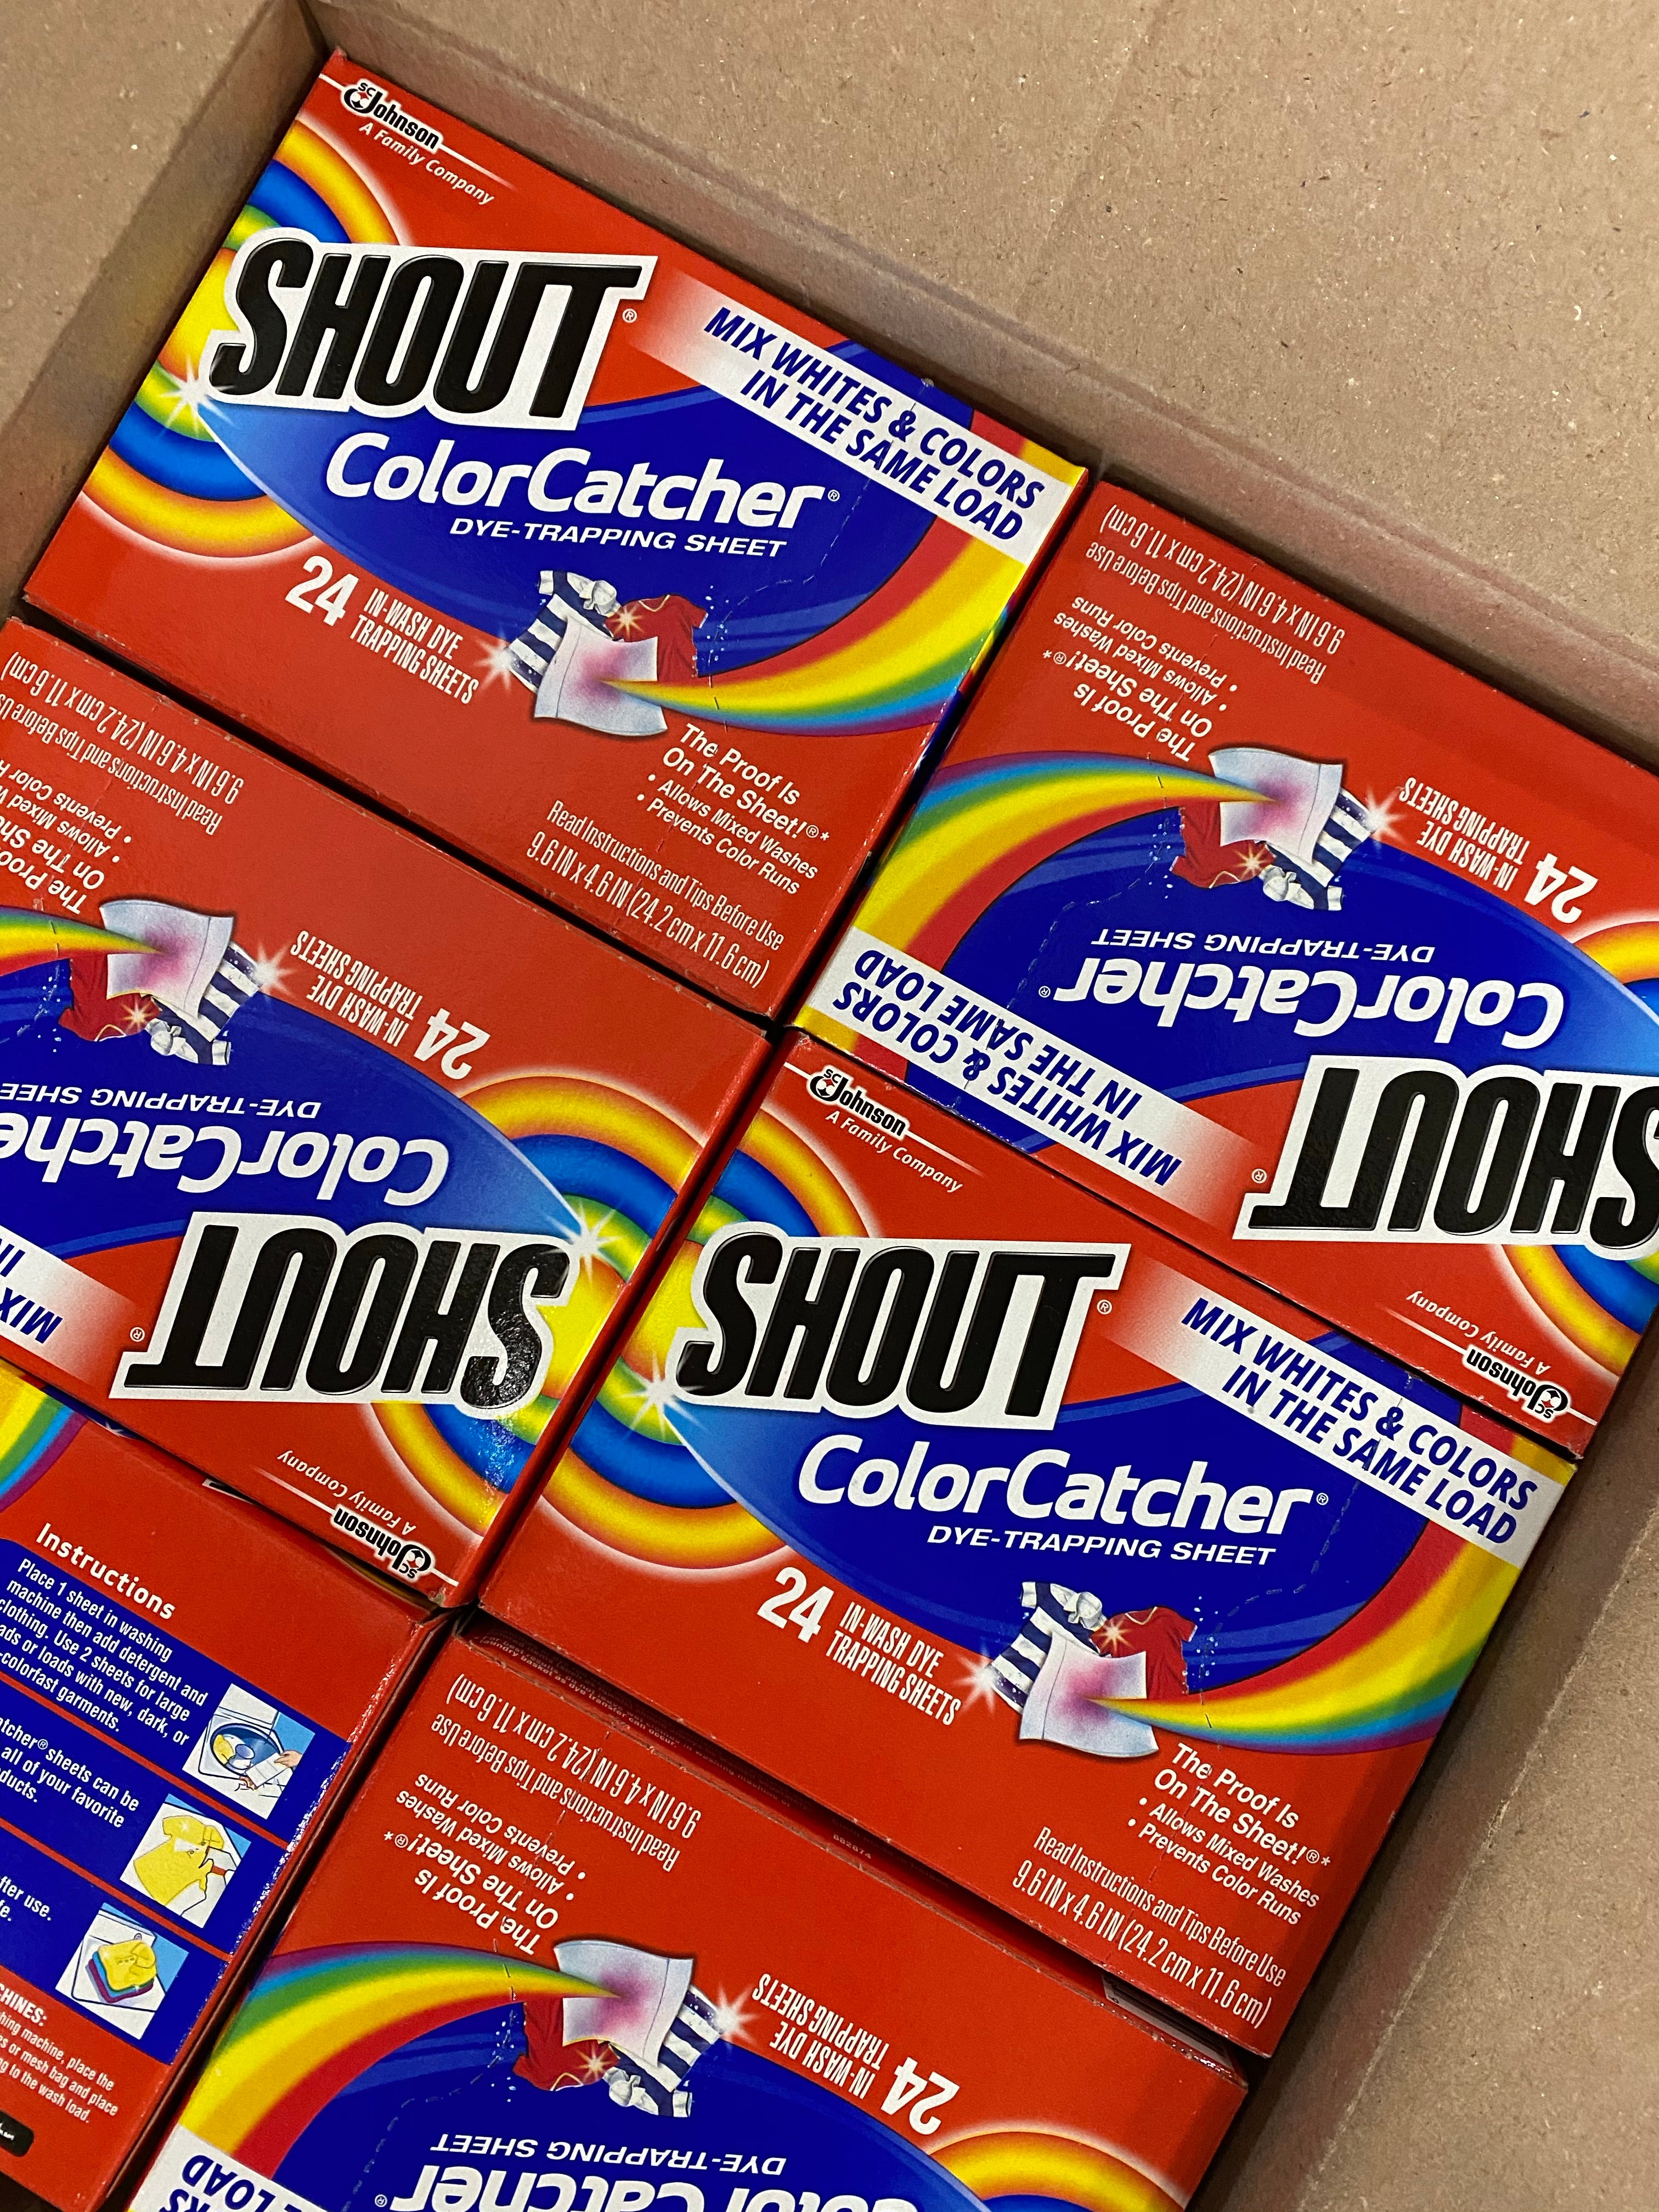 Shout Color Catcher reviews in Laundry Care - ChickAdvisor